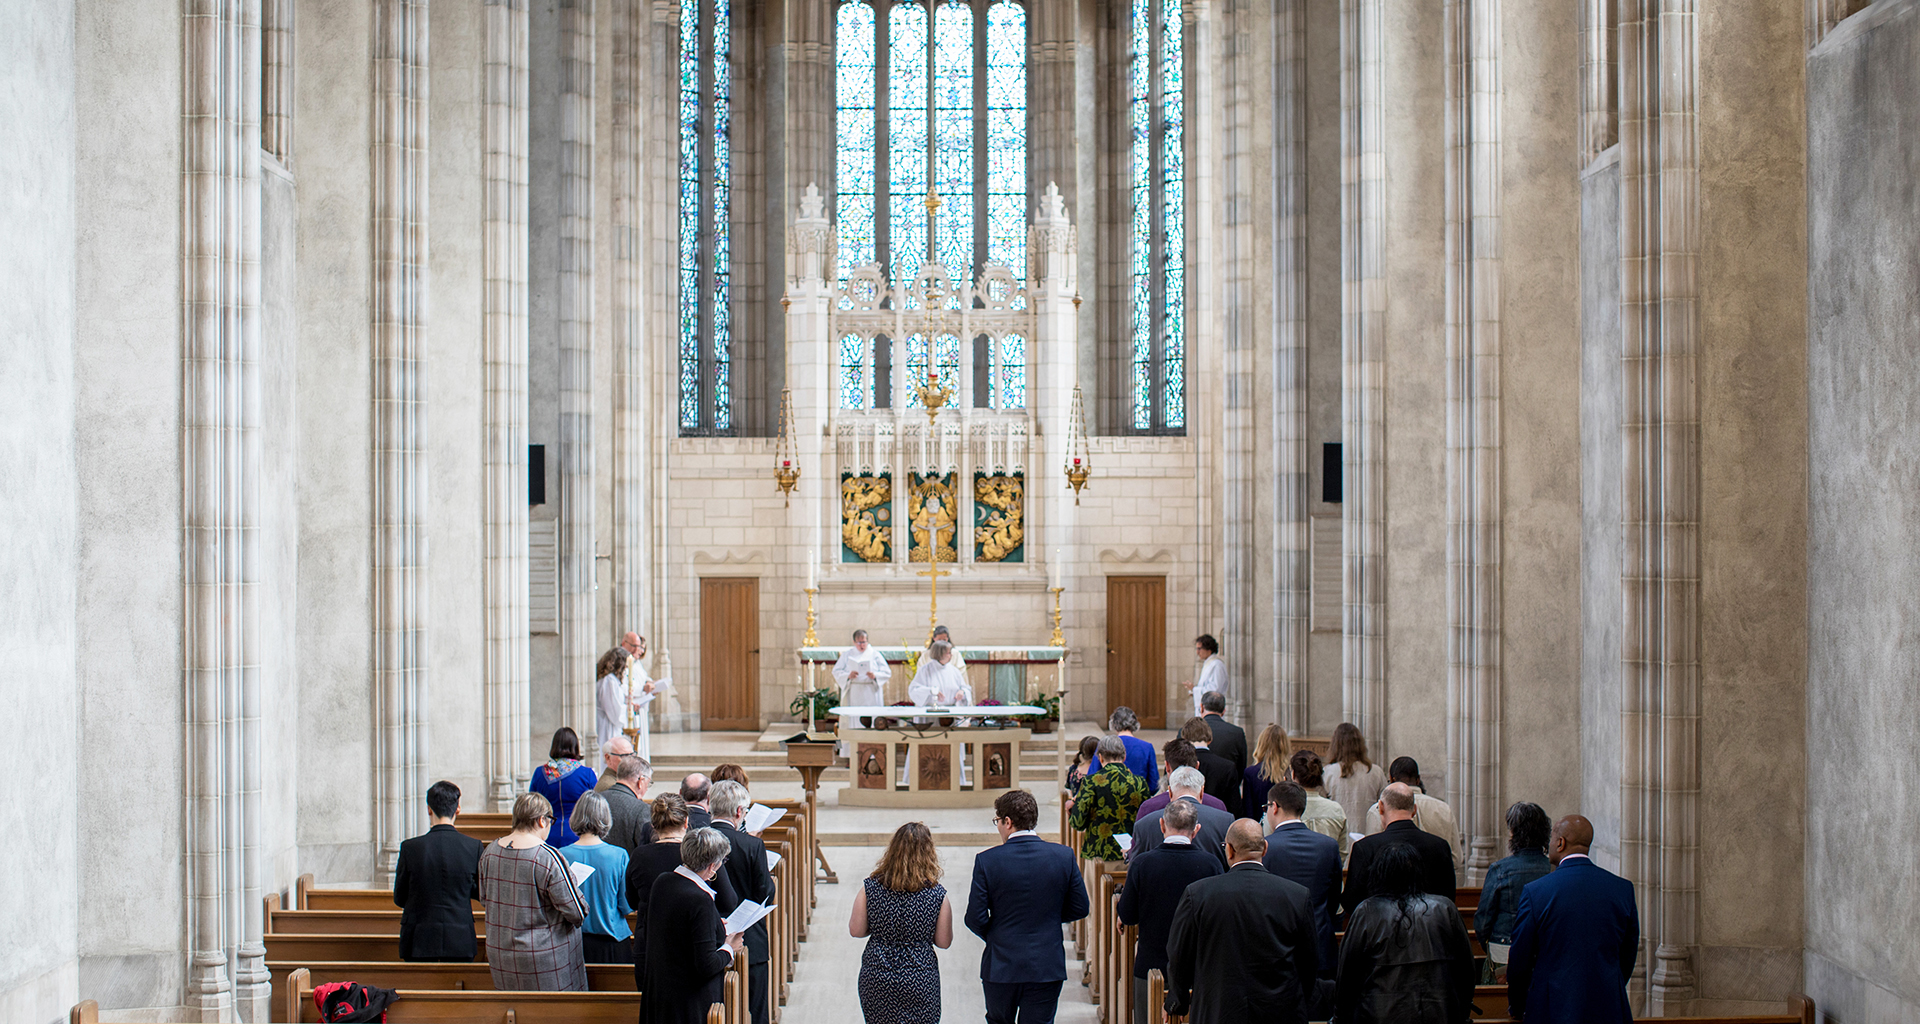 Evensong service in the Trinity Chapel